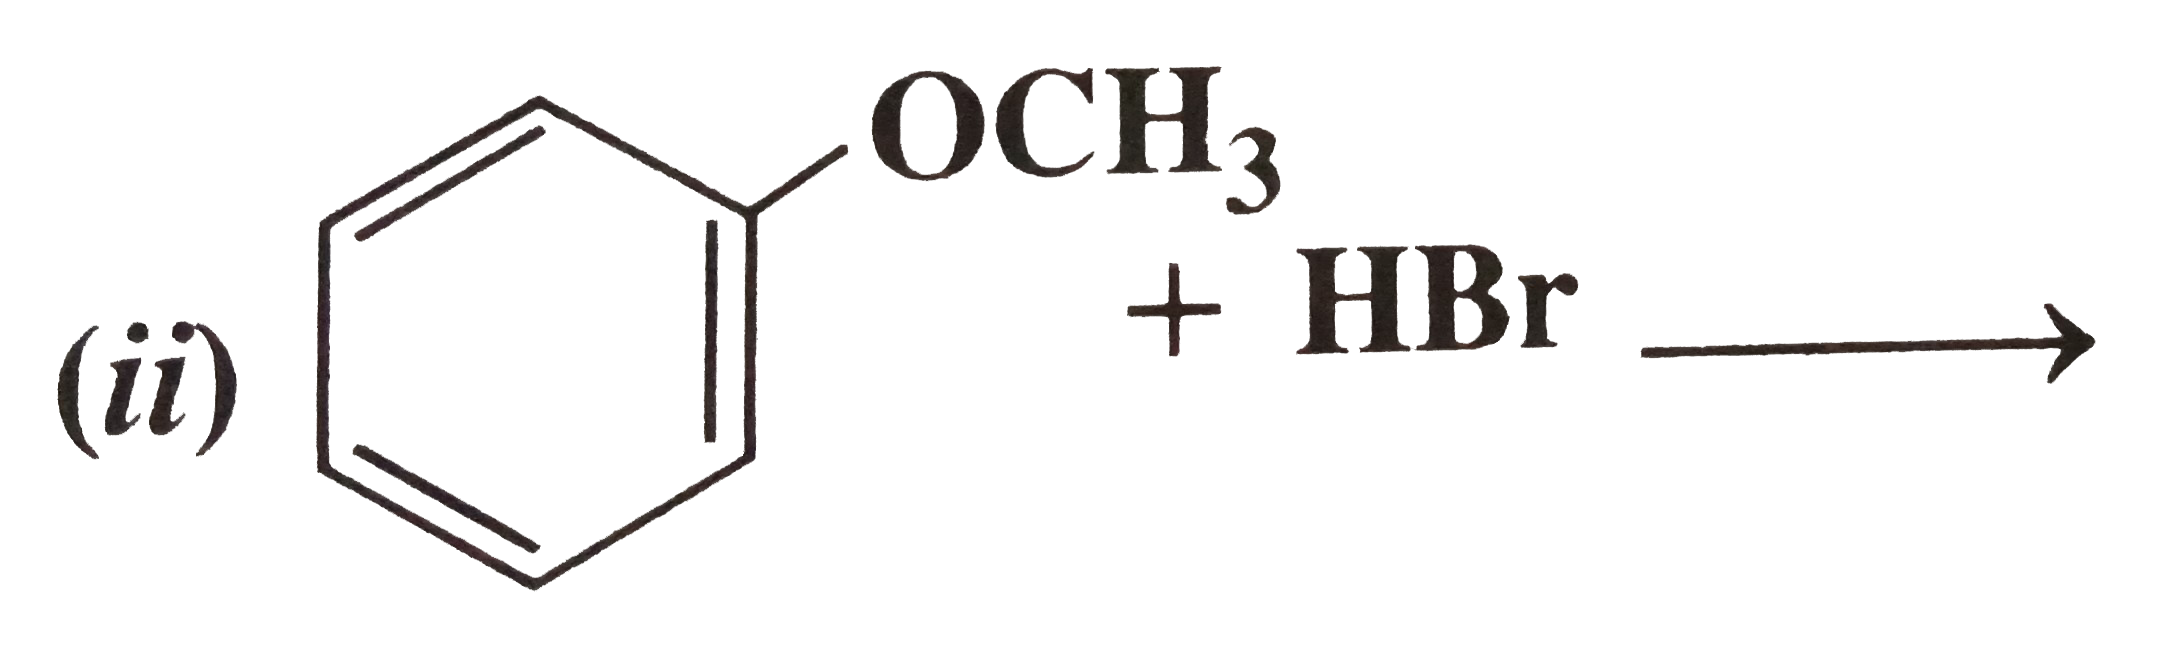 State the products of the following reactions   (i) CH(3)-CH(2)-CH(2)-OCH(3)+HBrrarr   (ii)     (iii) (CH(3))(3)C-OC(2)H(5)+HI